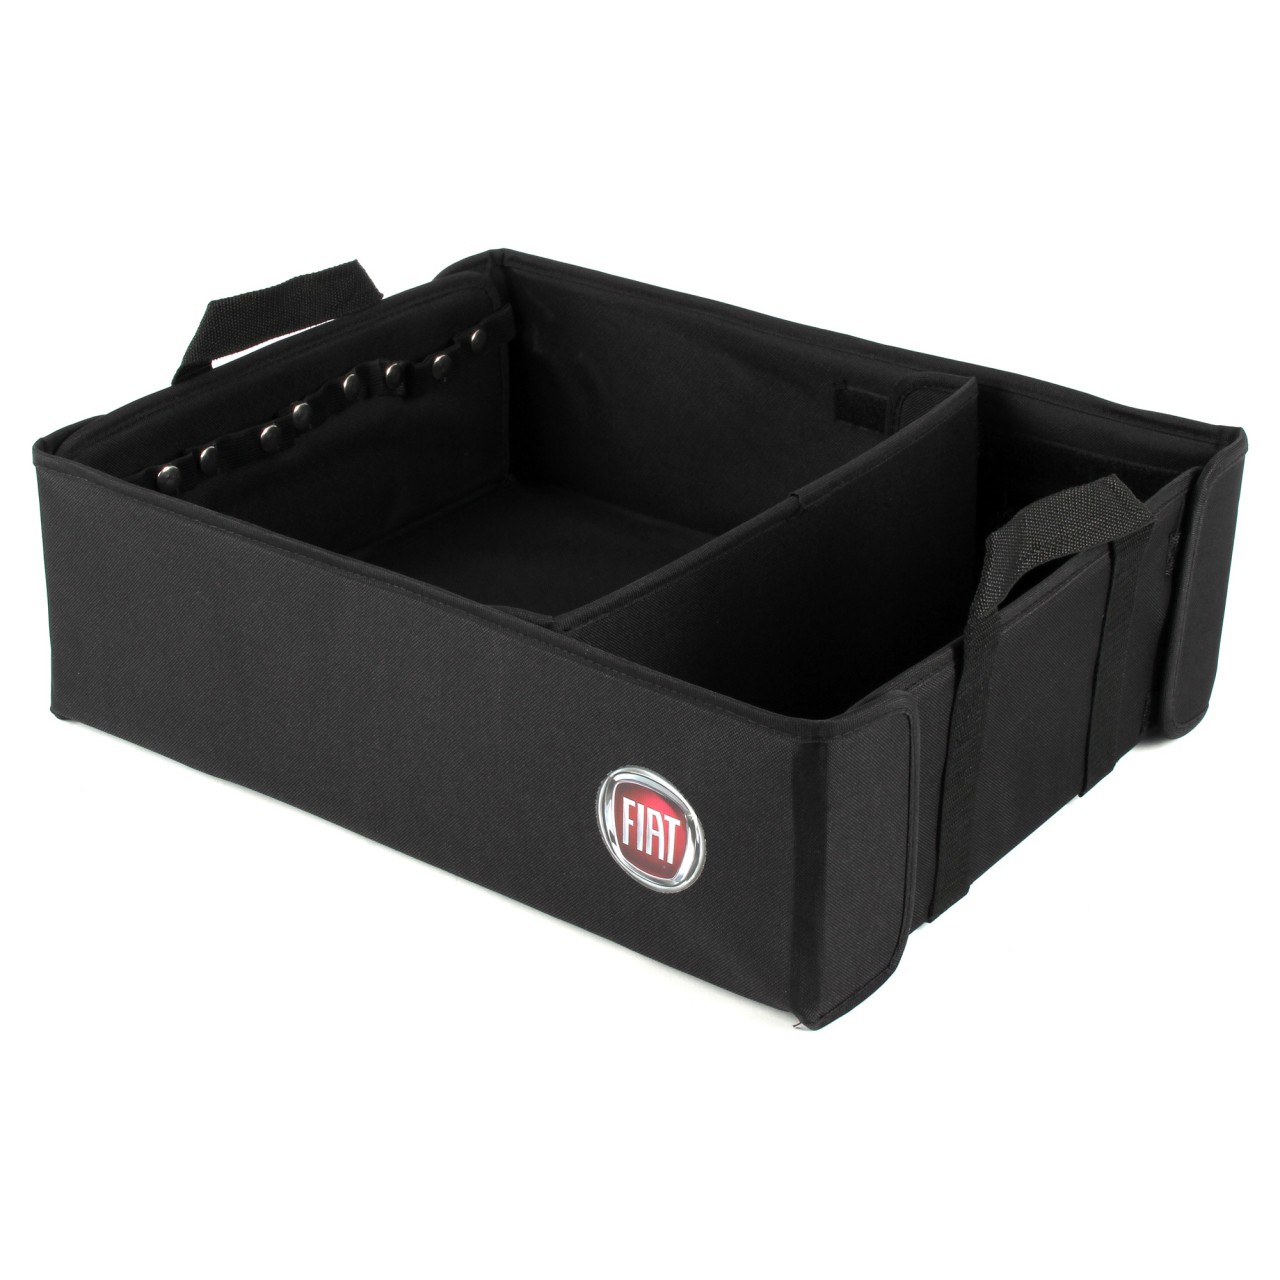 LUGGAGE COMPARTMENT CONTAINER FOR FIAT AND FIAT PROFESSIONAL